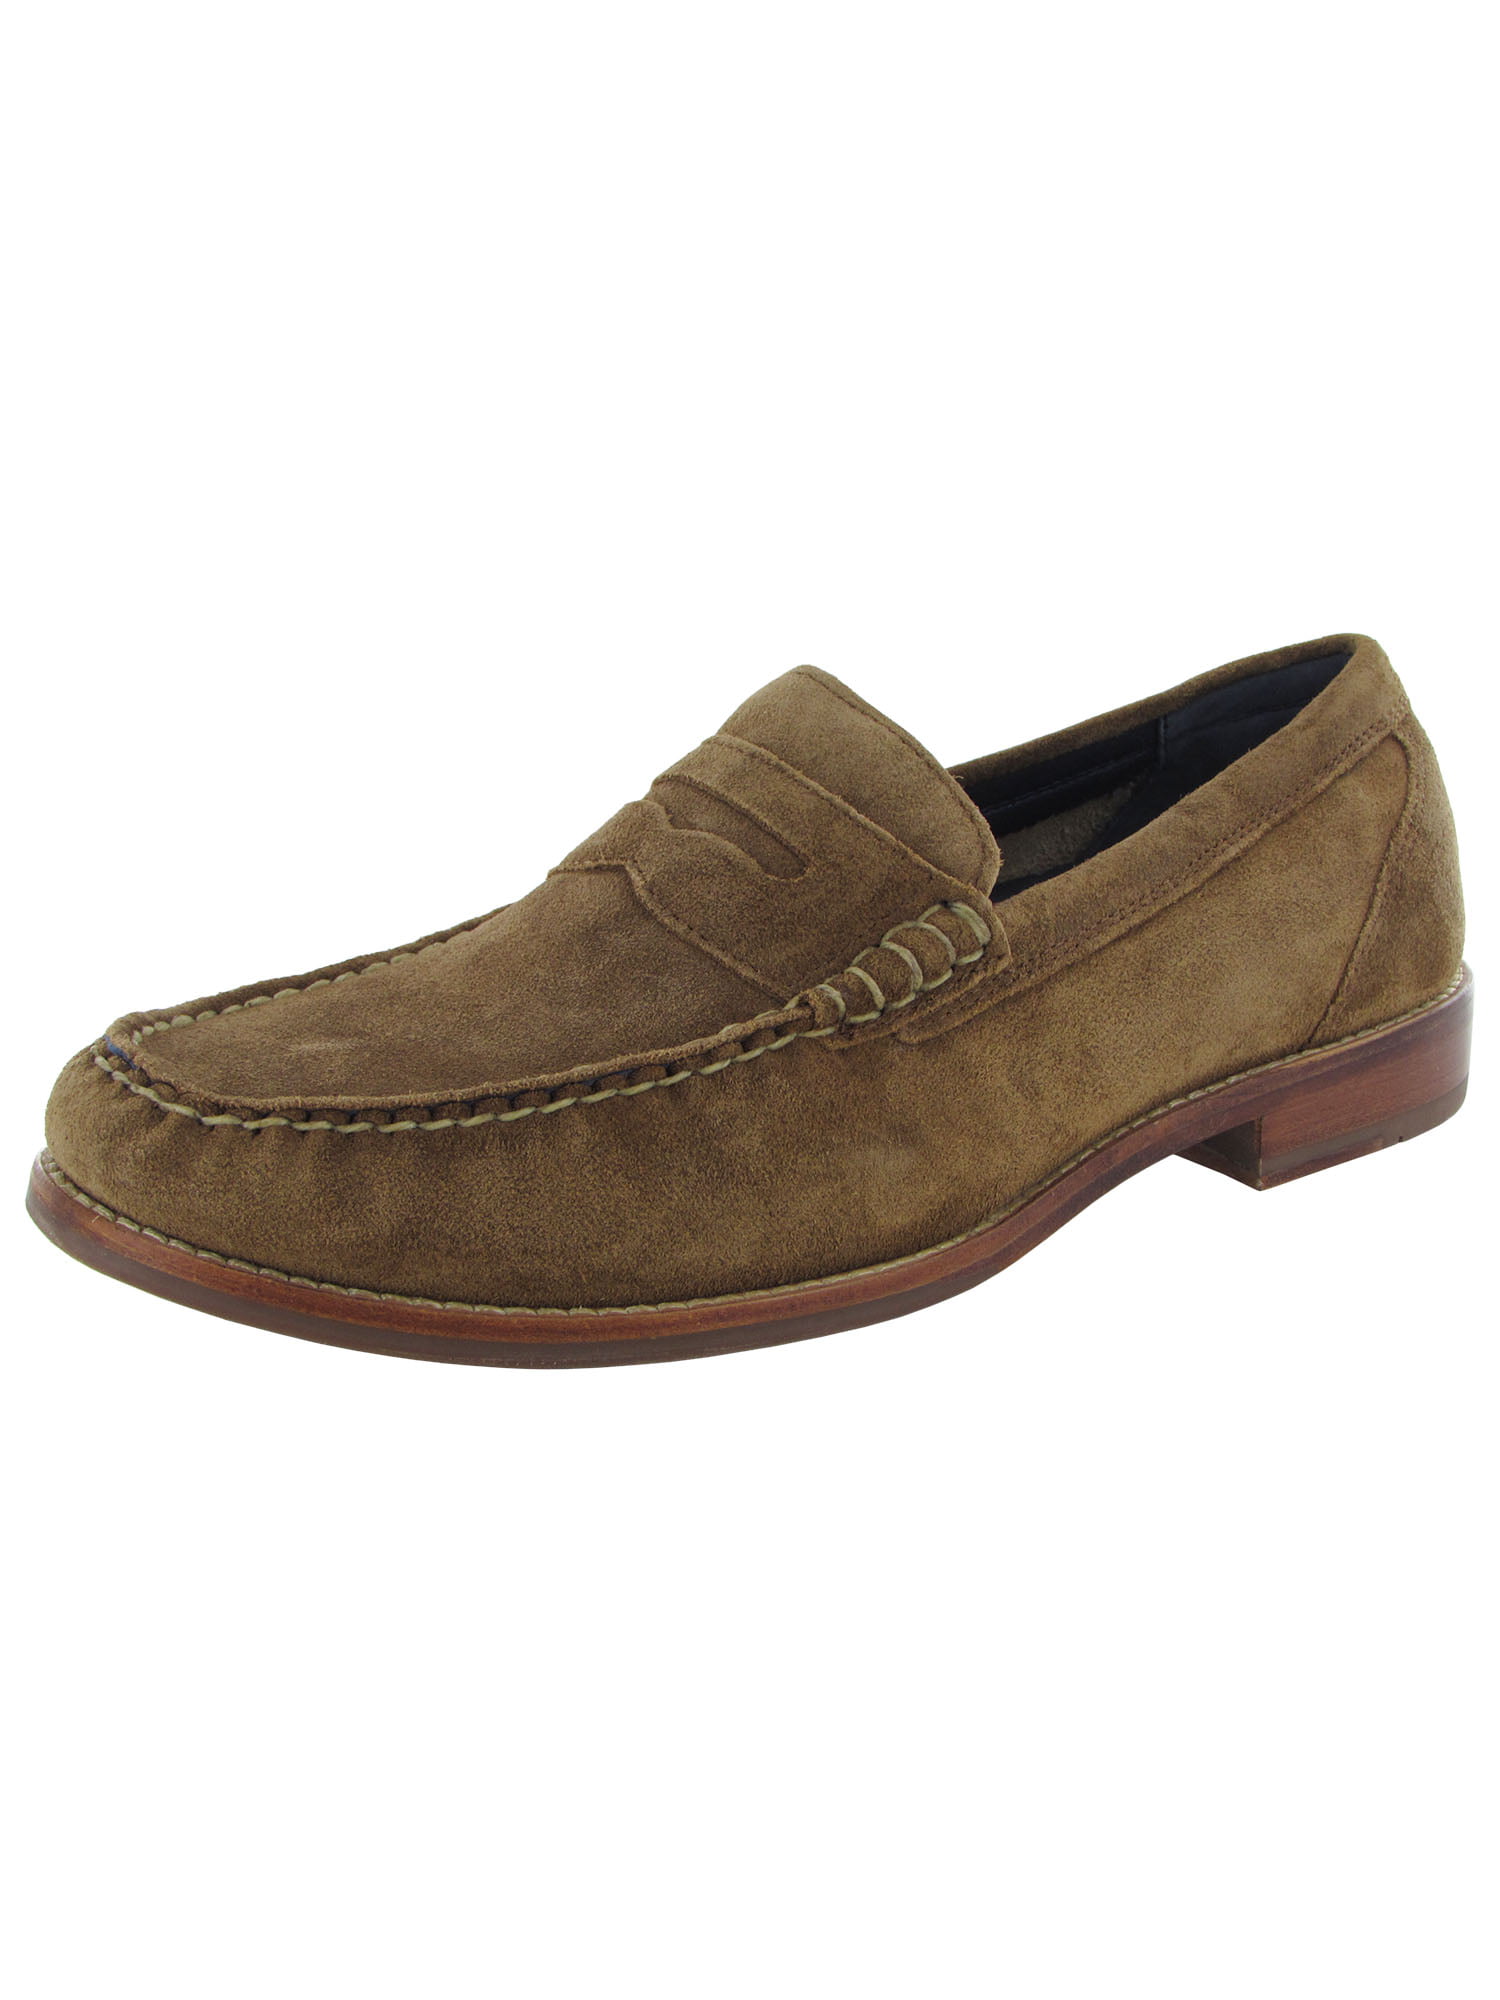 Cole Haan Mens Pinch Grand Casual Penny Loafer